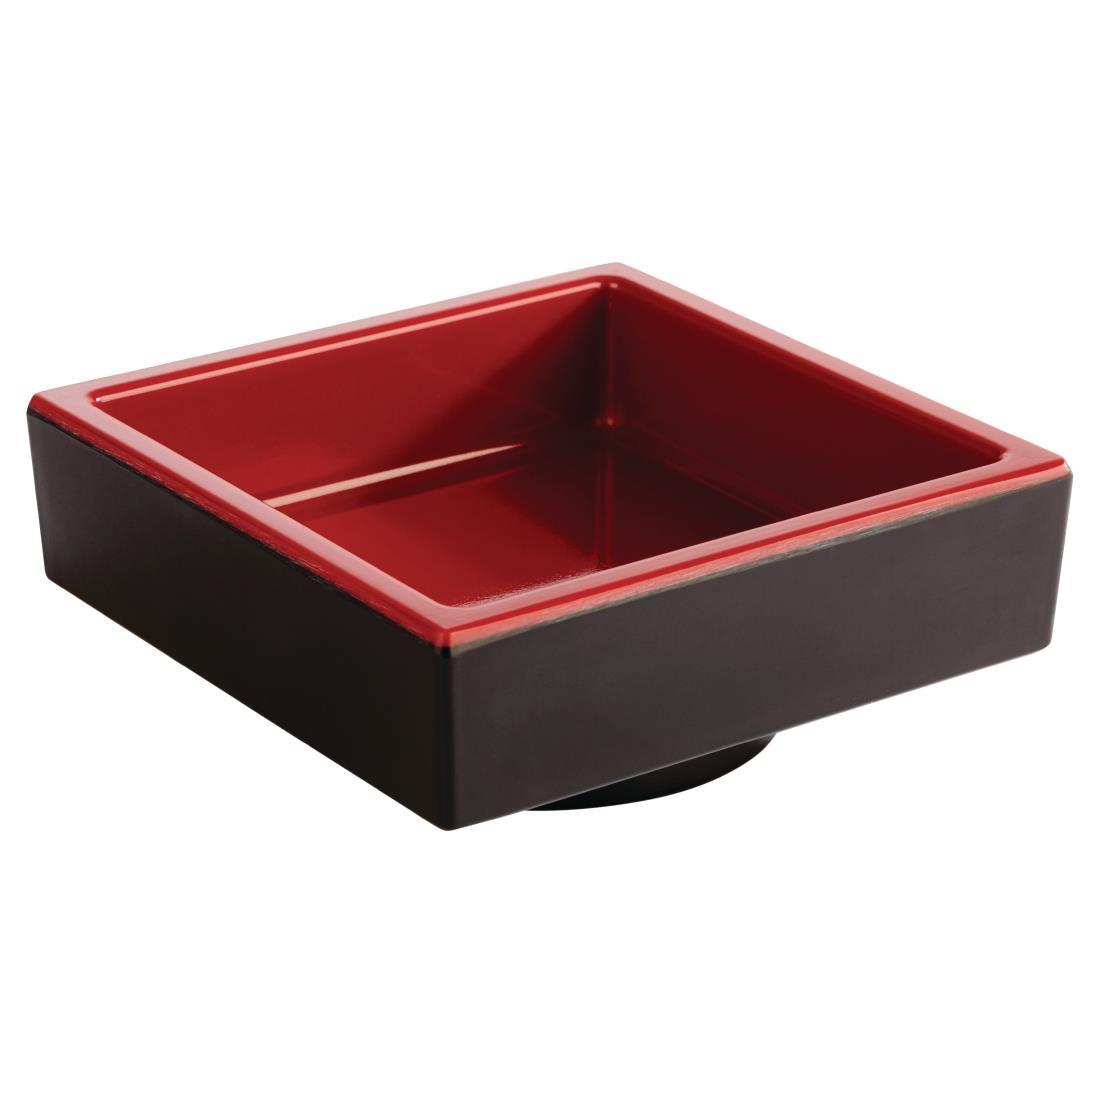 APS Asia+ Deep Square Bento Box Red 230mm - Each - DW133 - 1